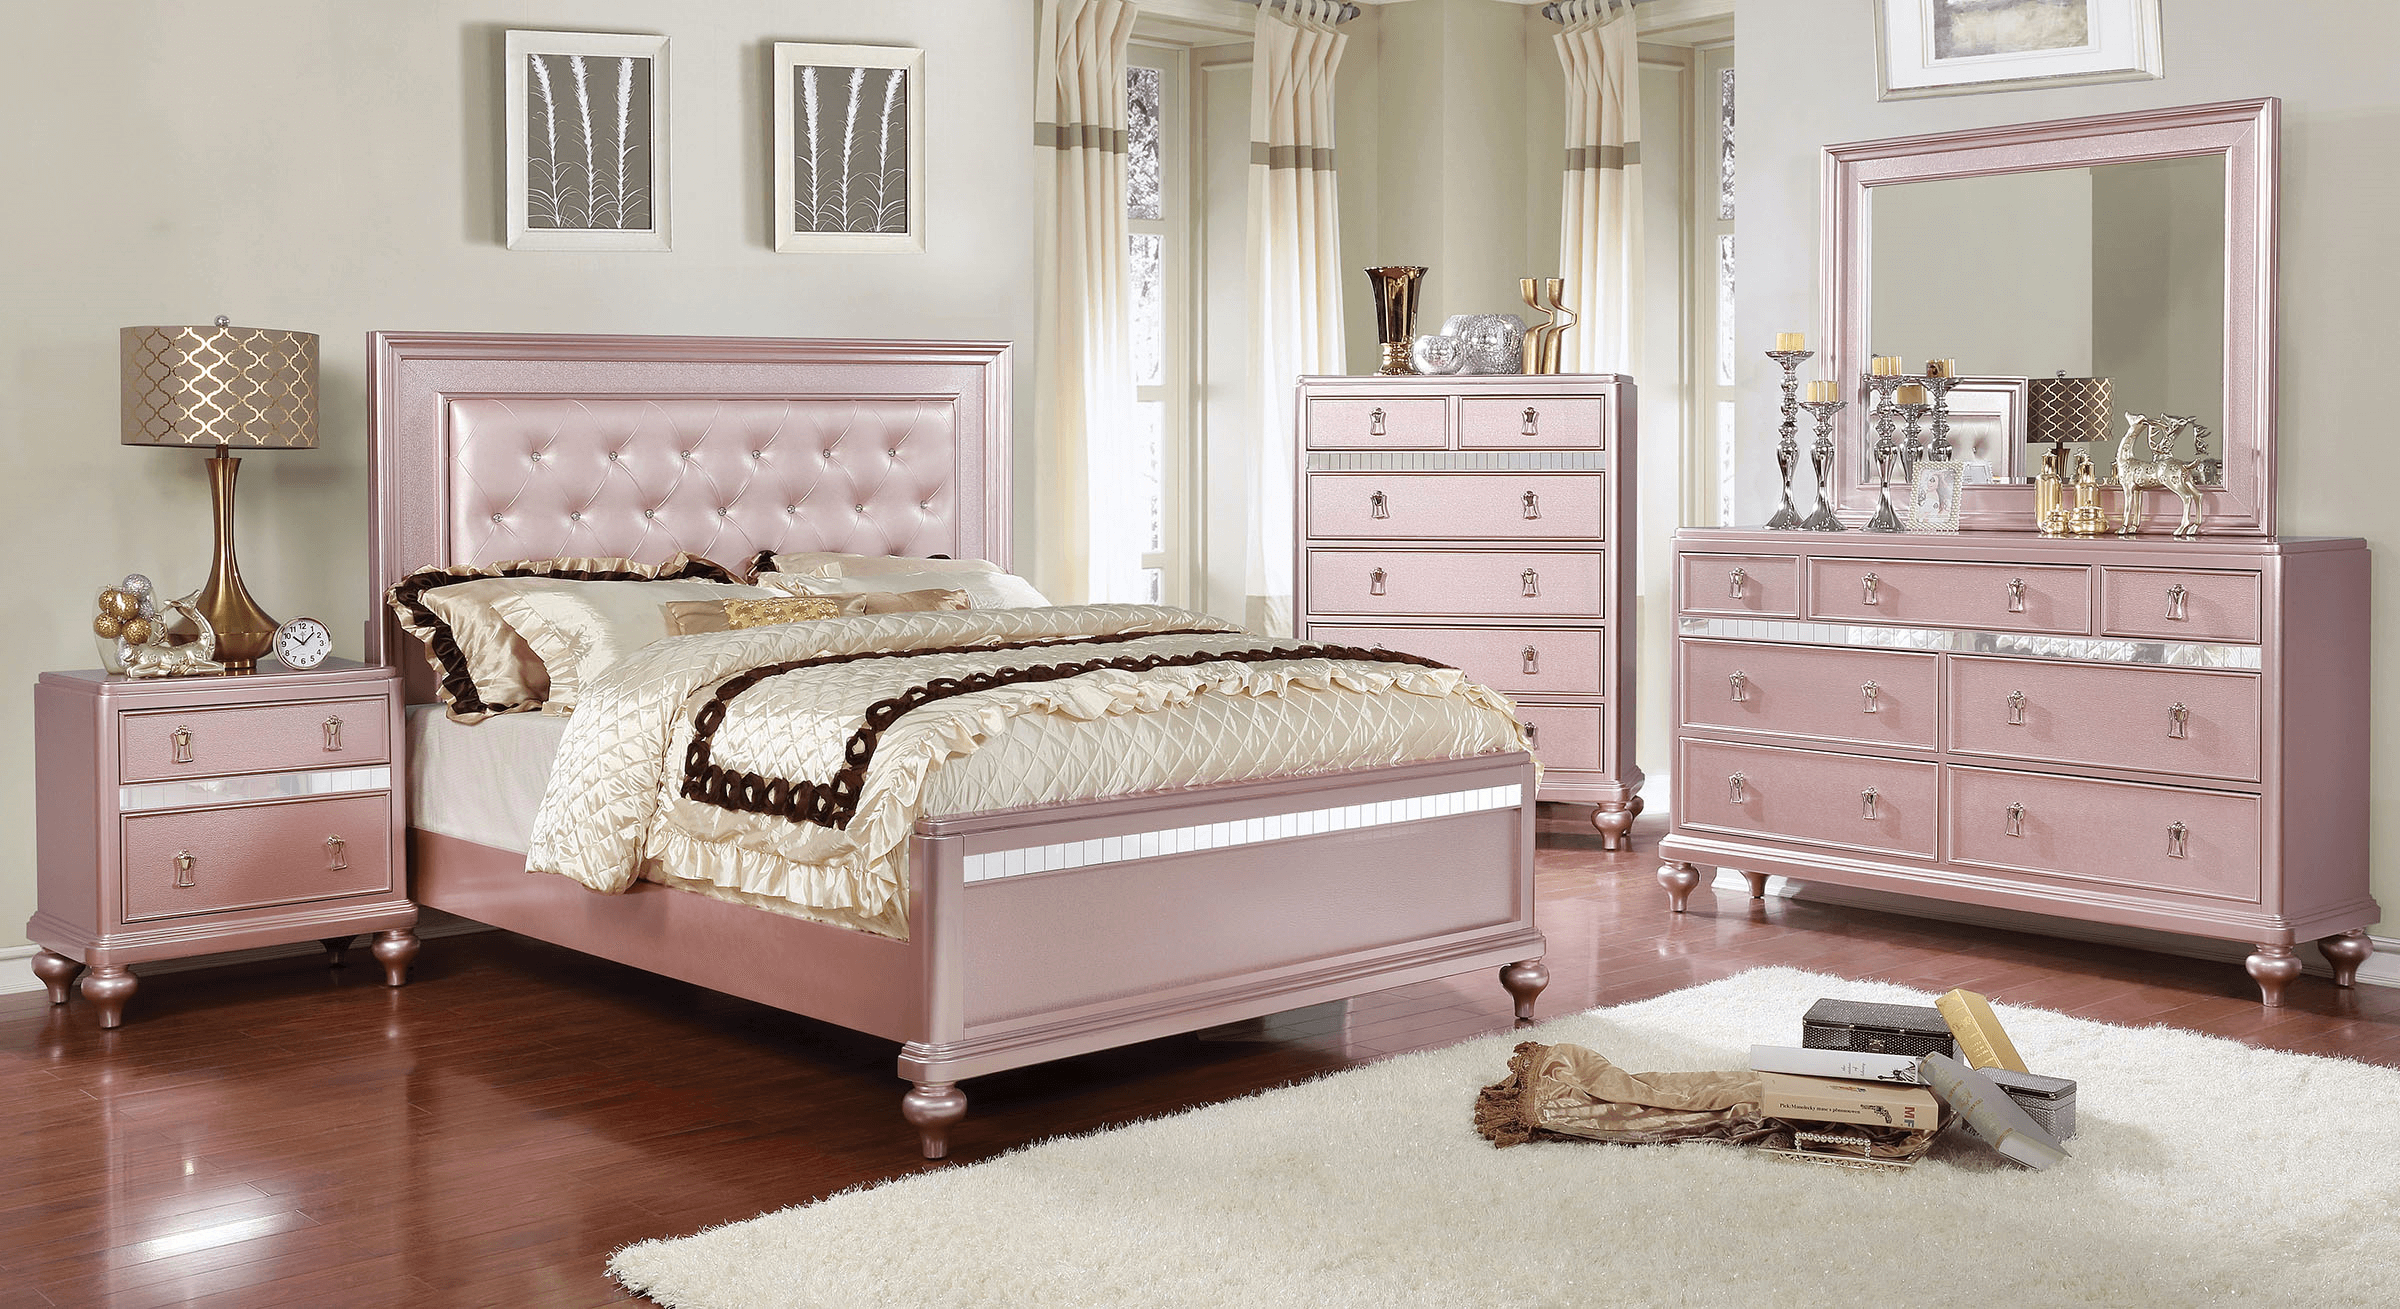 Ariston Rose Gold Bedroom Set intended for sizing 2400 X 1309